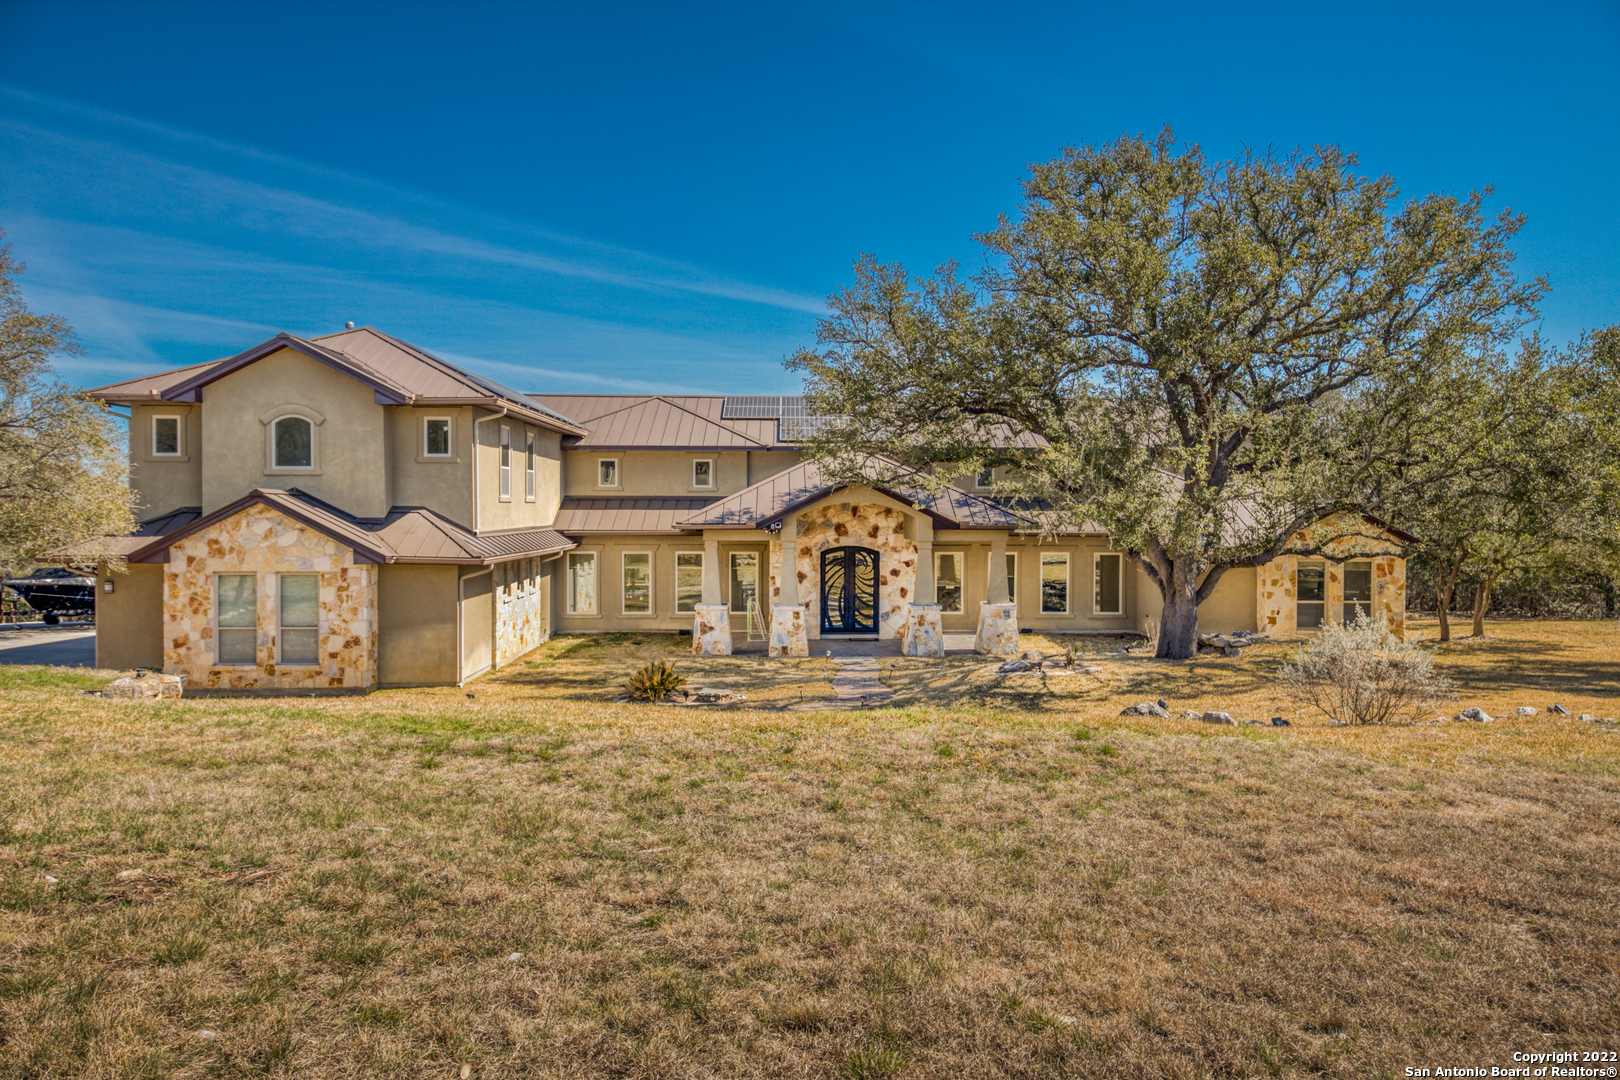 Come view this Beautiful, contemporary, well kept home in the heart of the hill country in person! This unique home sits on 13 Acres, 6 bedrooms, 5 baths, open floor plan with high ceilings, beautiful kitchen, grant counter tops and built in fridge. Primary bedroom does have an upstairs office with  Custom Built in shelving, and huge primary bath. This home has a zip line installed from from your private park, to the gorgeous pool! The outdoor patio area is your private oasis ready for family gatherings and memories. This home is equipped with solar panels, a irrigation system, one year old A/C  and so much more! Schedule your tour today!!